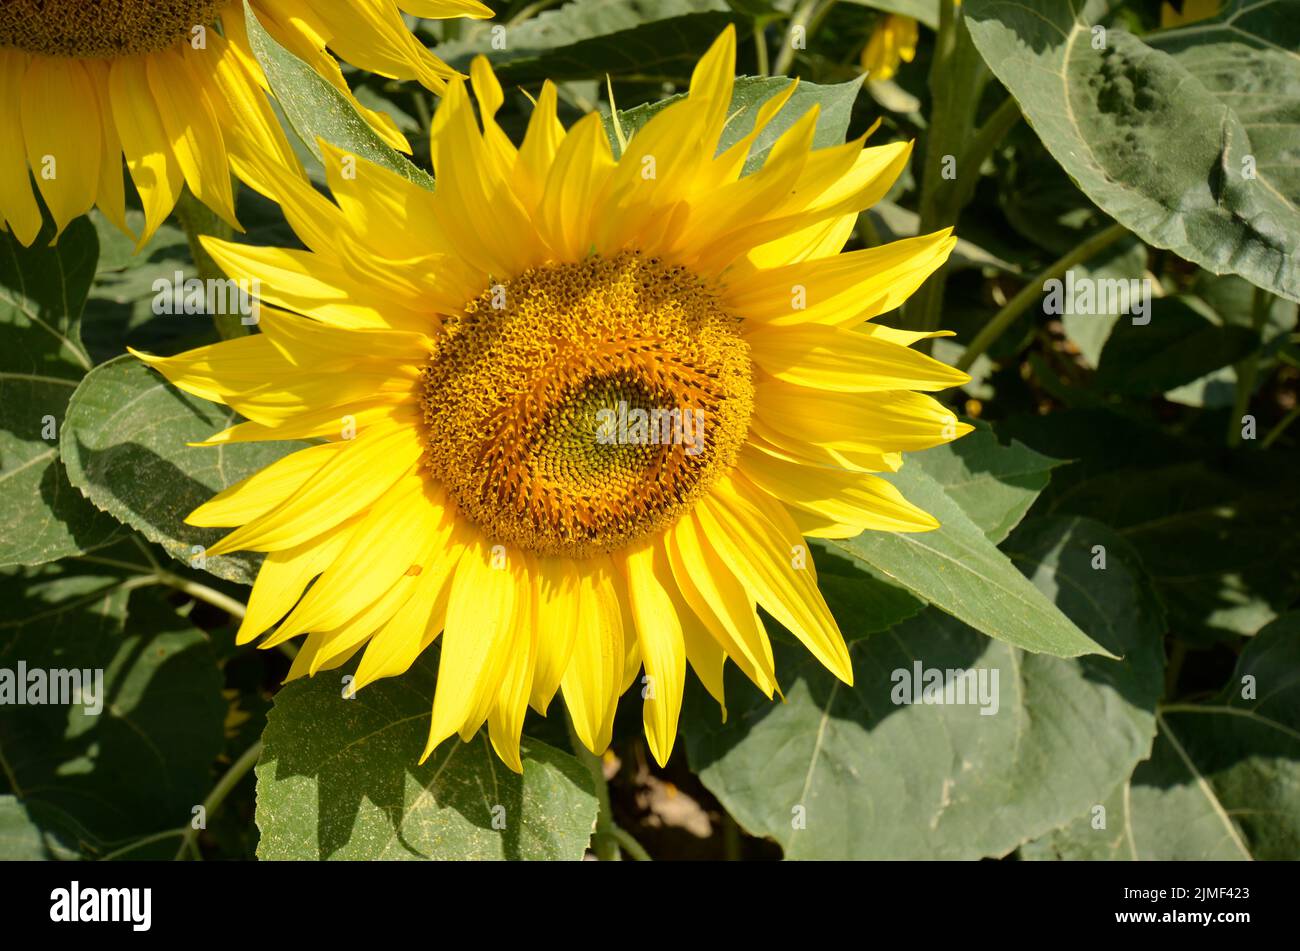 Austria, sunflower blossom- the seeds are used in industry to produce various products such as edible oil, snack seeds, bird feed and others Stock Photo